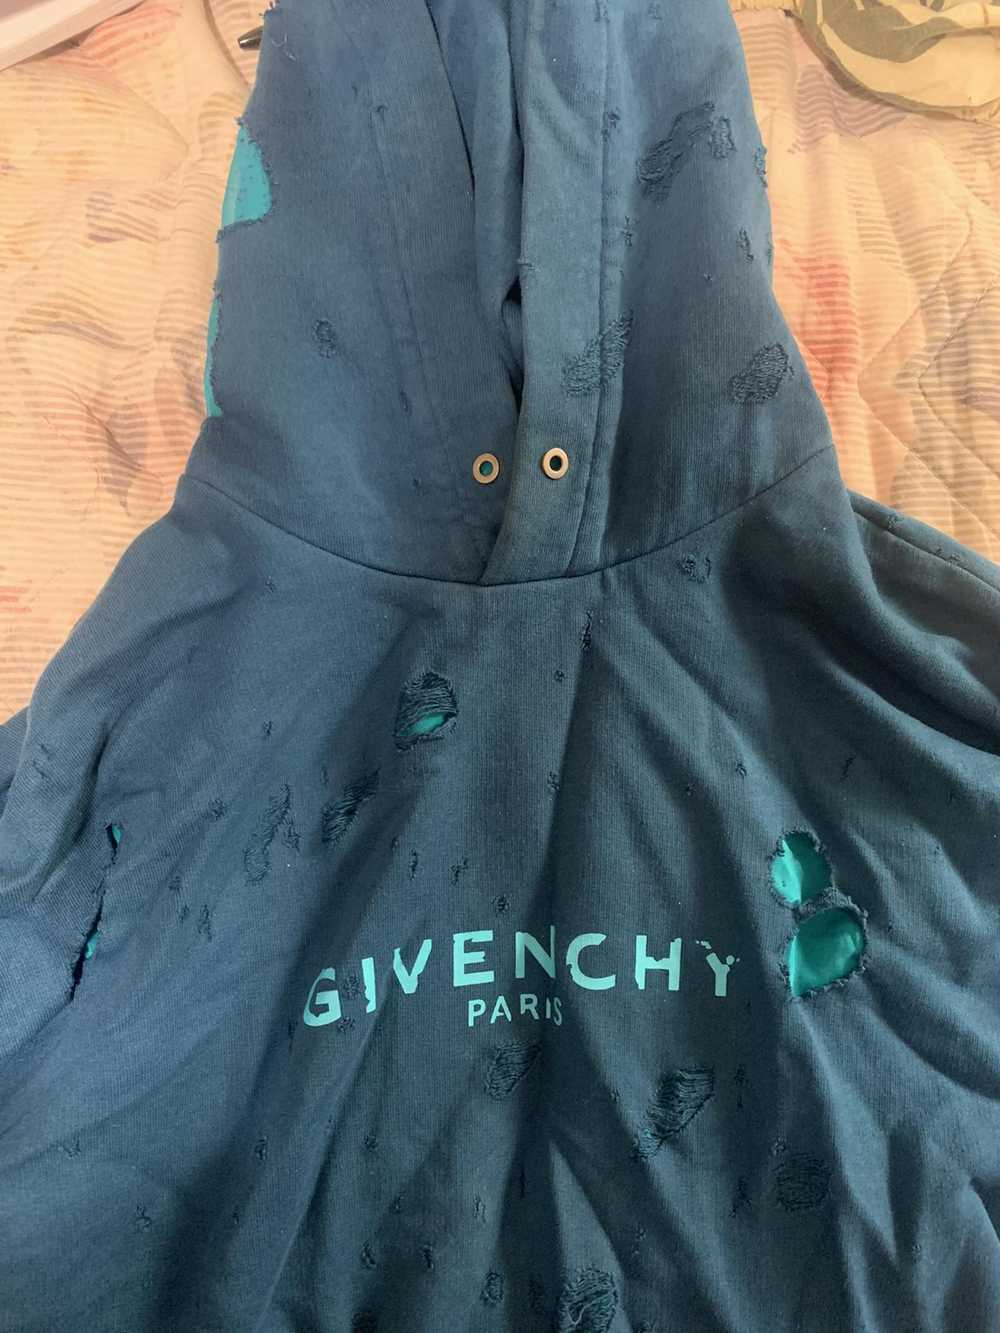 Givenchy Givenchy hoodie distressed - image 2